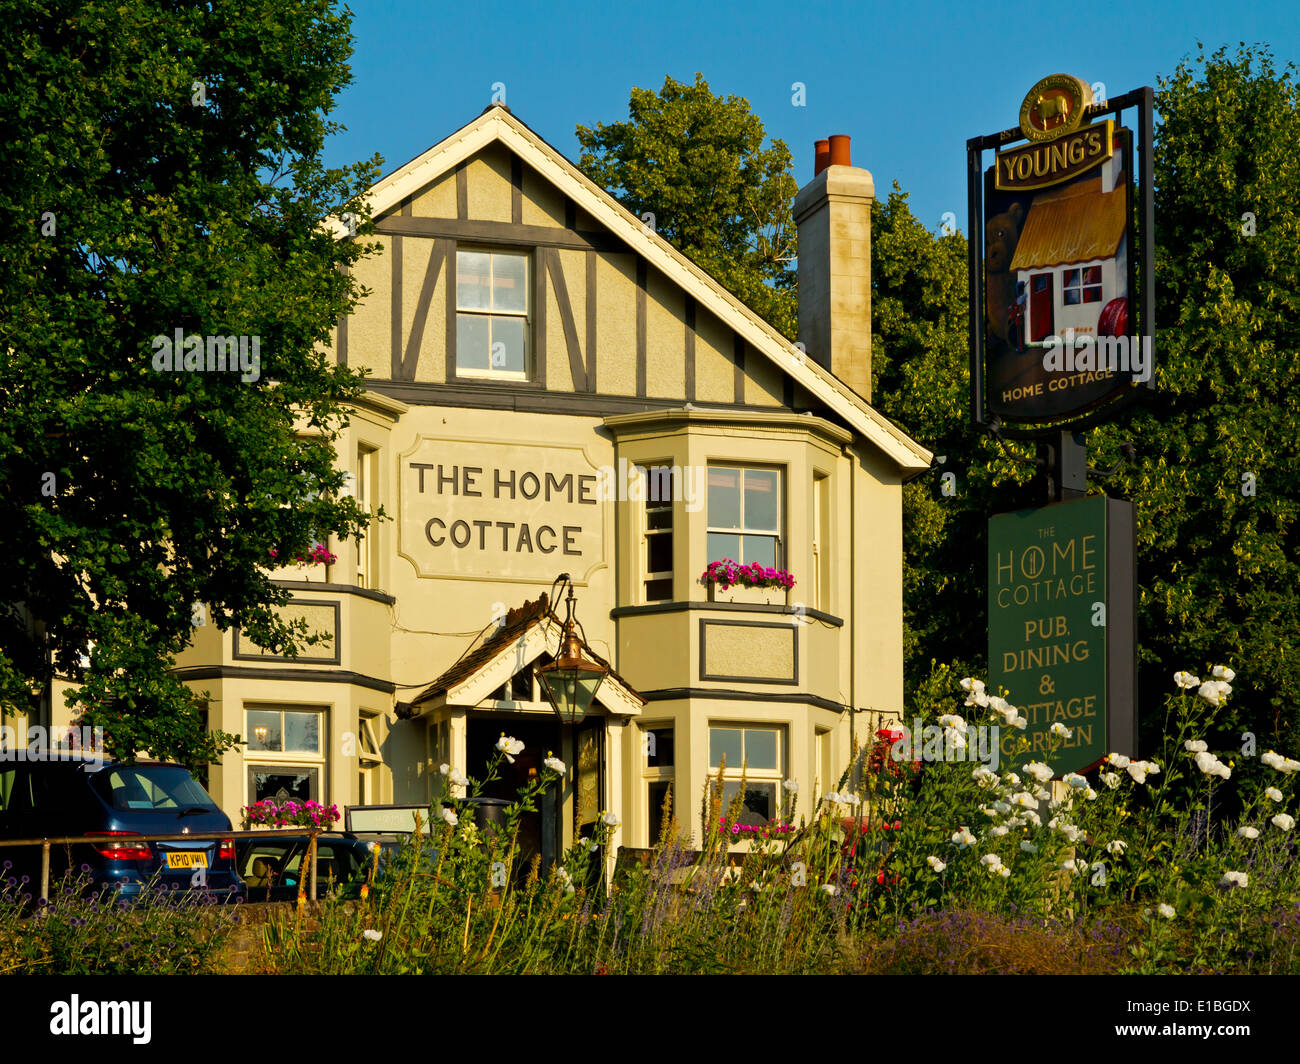 The Home Cottage Pub In Redhill Surrey England Uk A Traditional